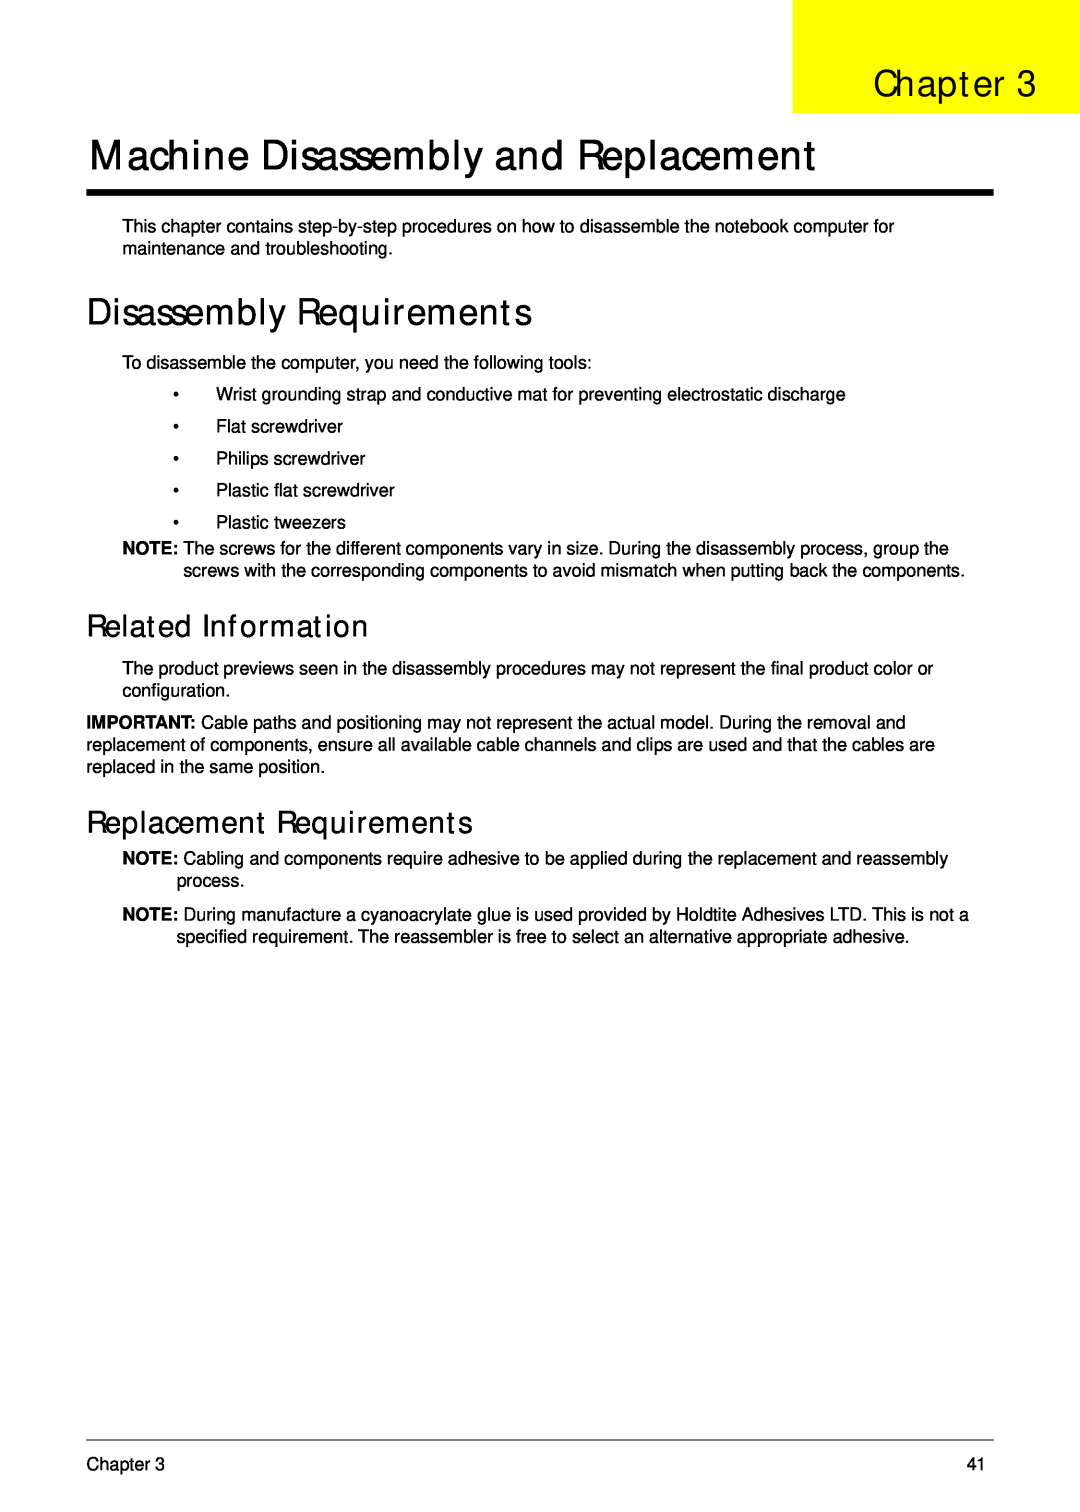 Gateway EC14 Machine Disassembly and Replacement, Disassembly Requirements, Related Information, Replacement Requirements 